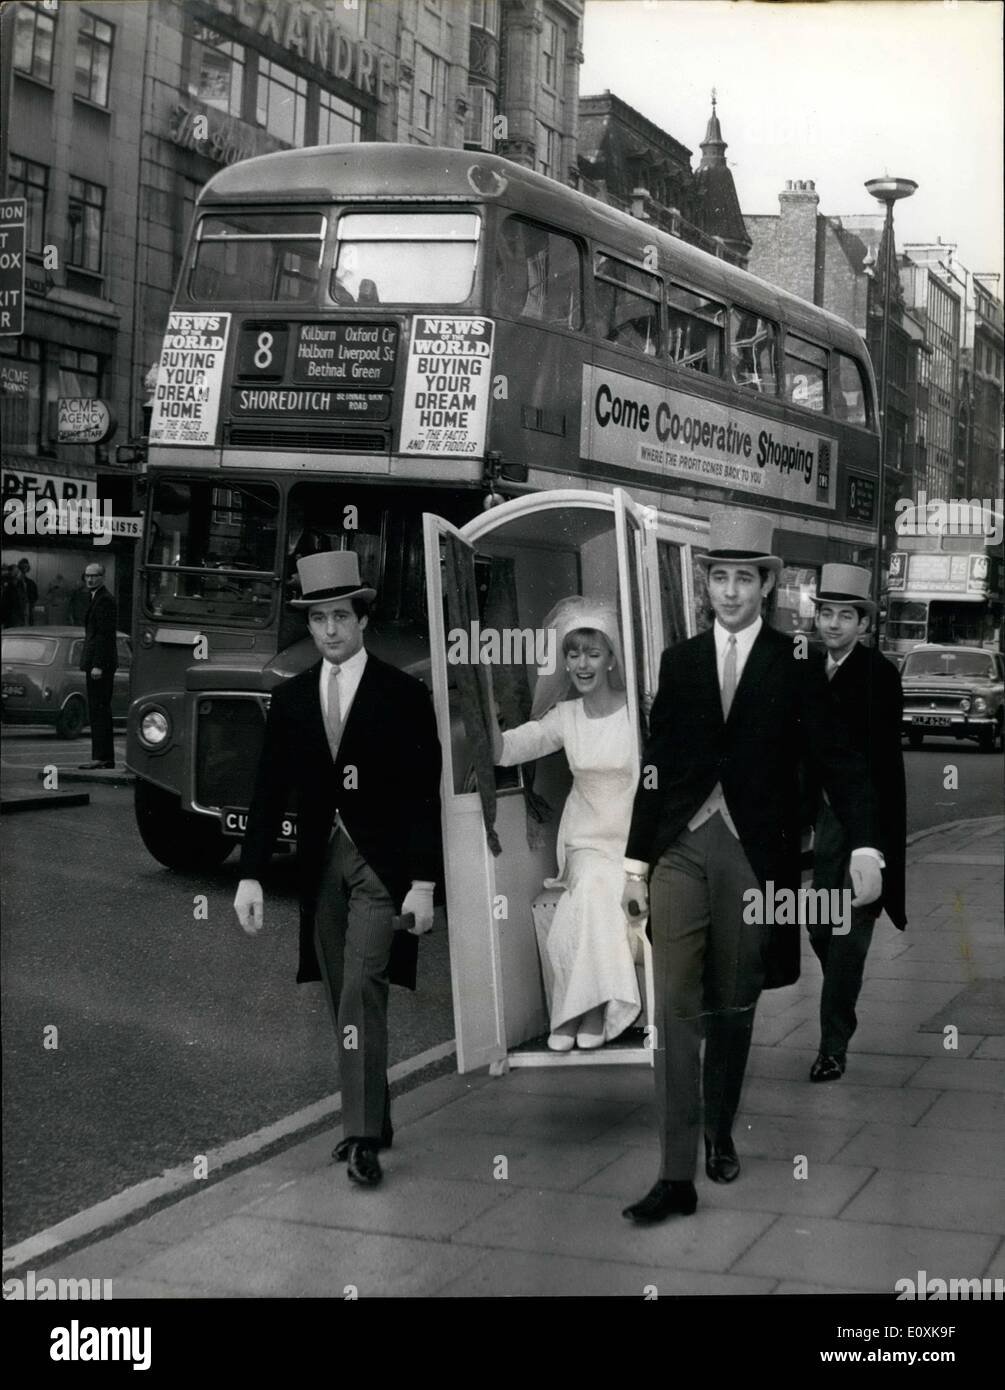 Mar. 03, 1967 - Getting to te church on Time. by Sedan. A bride in a four manned Sedan Chair versus a 210 horse power car, set off for St. Ann's Church in Wardour Street, from Young's Dress Hire, 178, Wardour Street, W.L. this morning. to prove that in congested towns, man power beats motor power at getting the bride to church on time. Especially at Easter, bride hire specialist Louis Young thinks the return of the sedan chair could be a pretty and practical ideas for brides Stock Photo